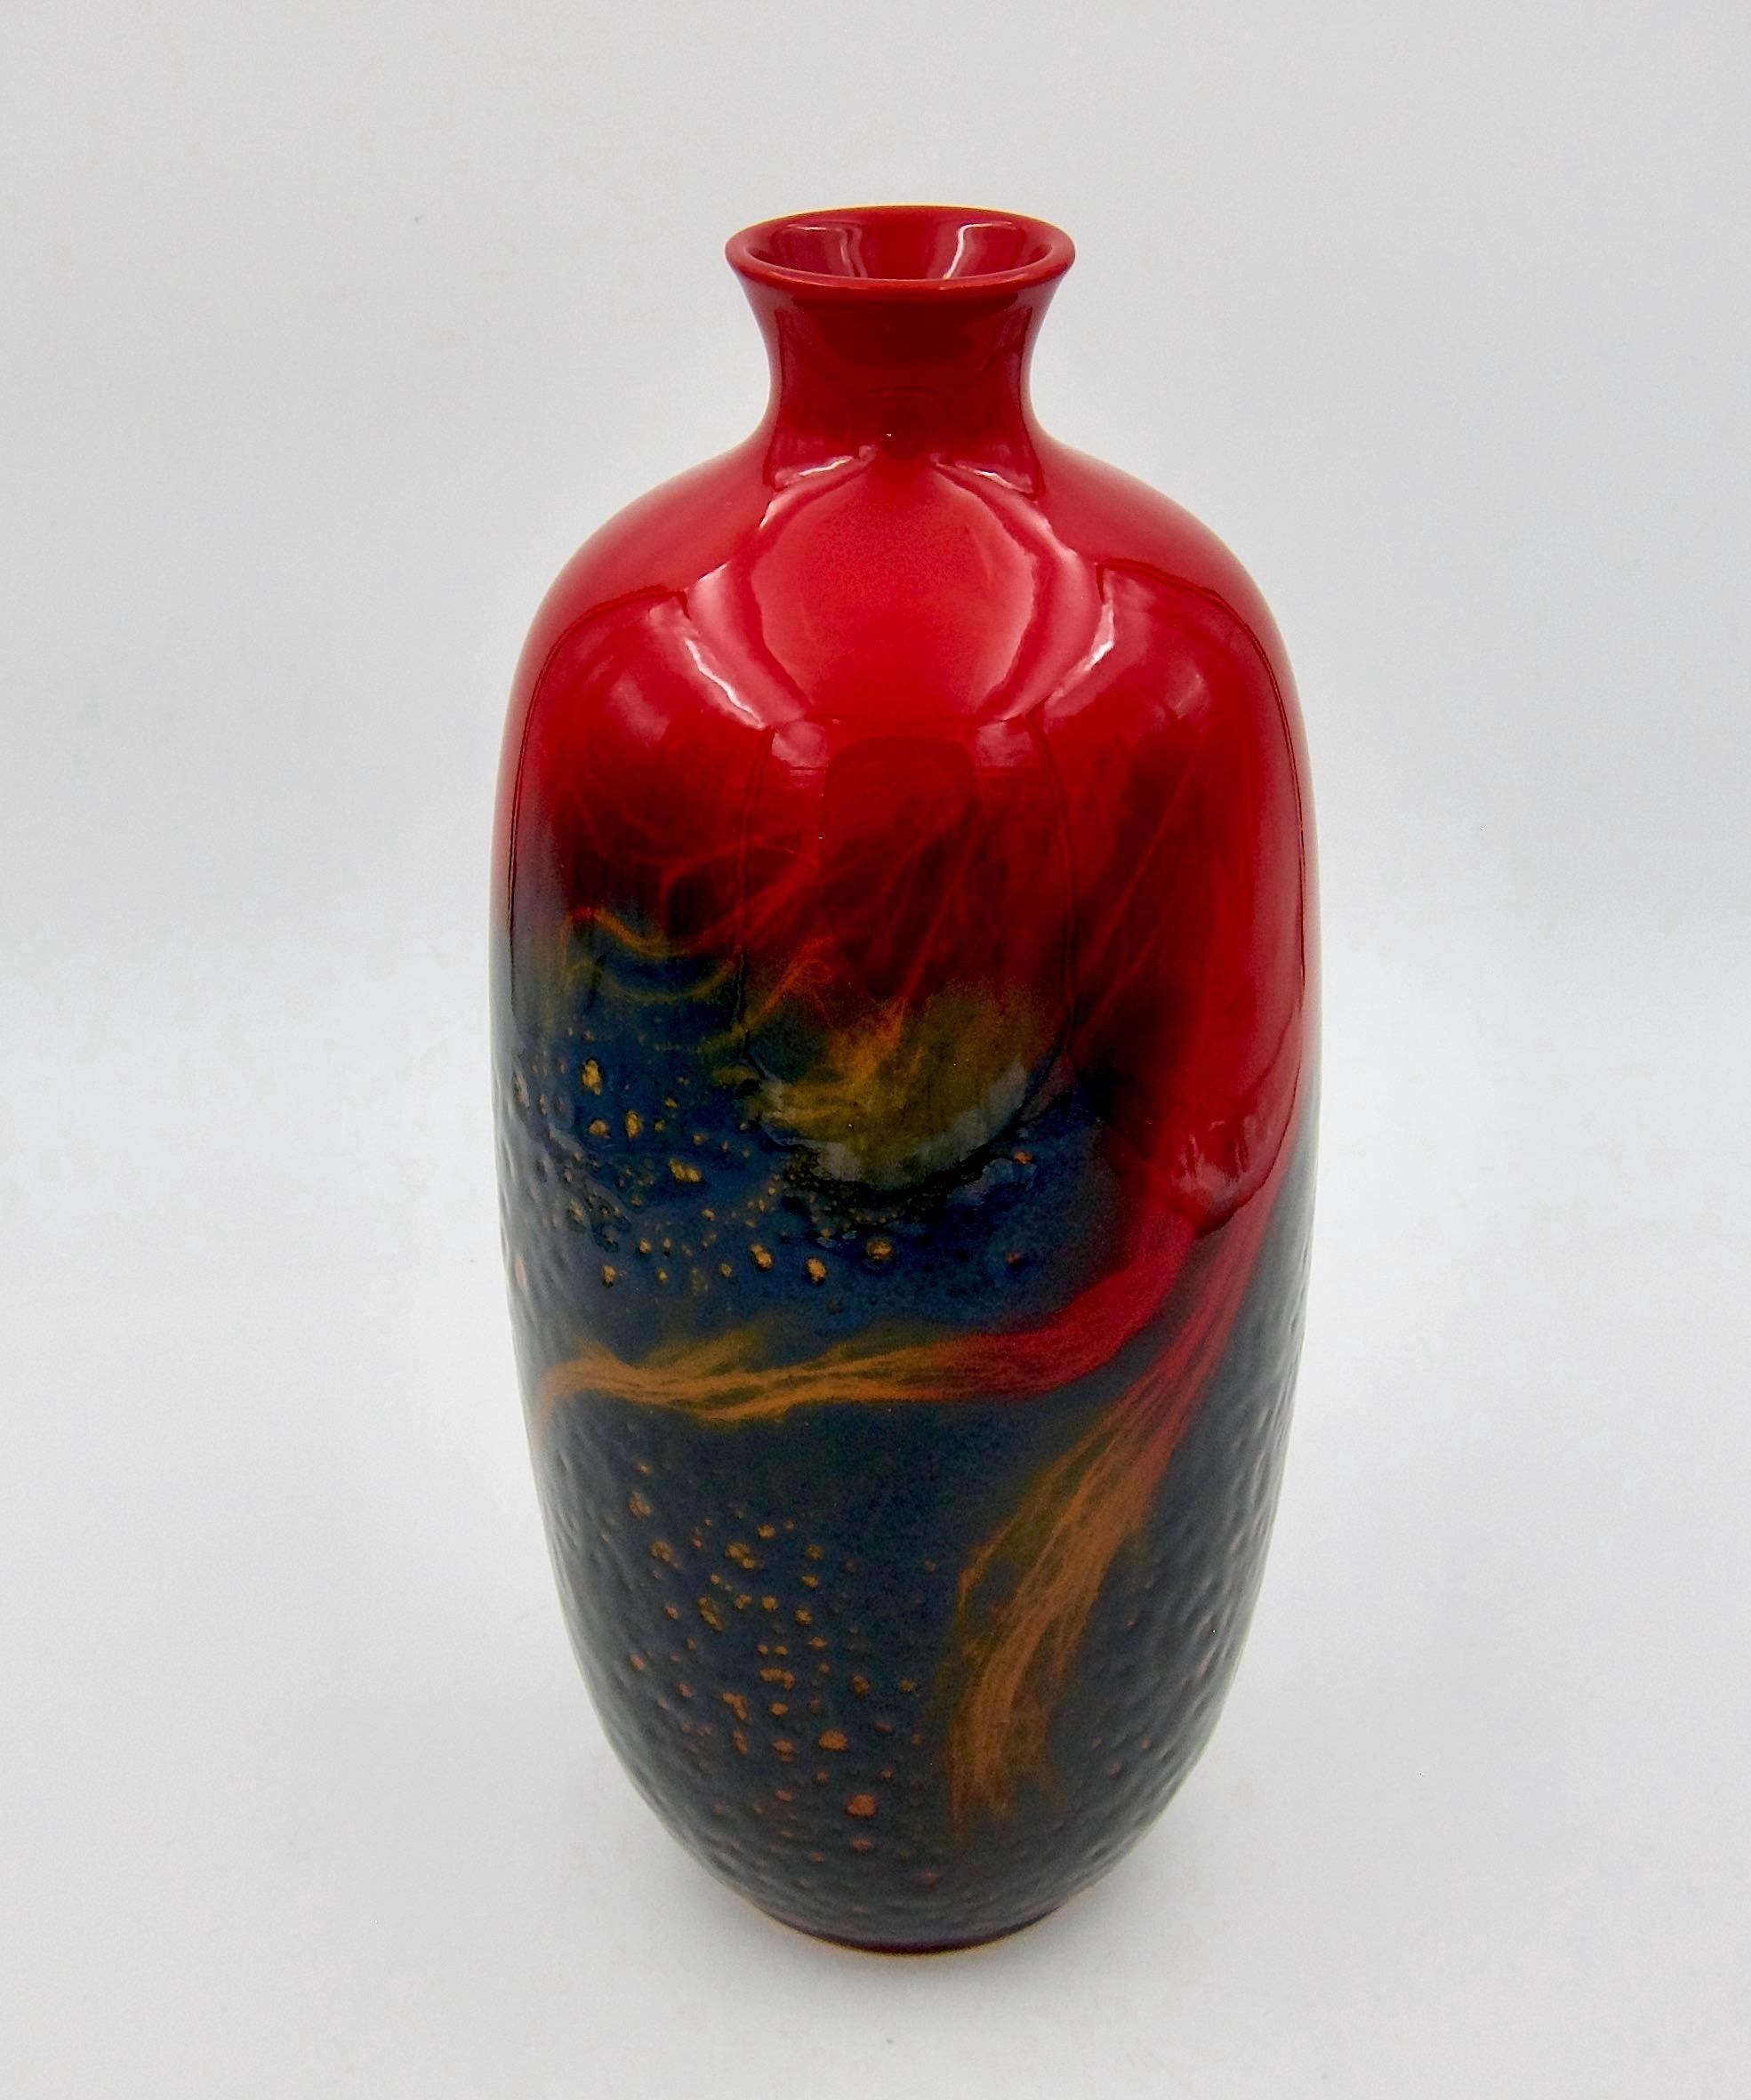 British Large Royal Doulton Red Flambe Vase from the Art Deco Period